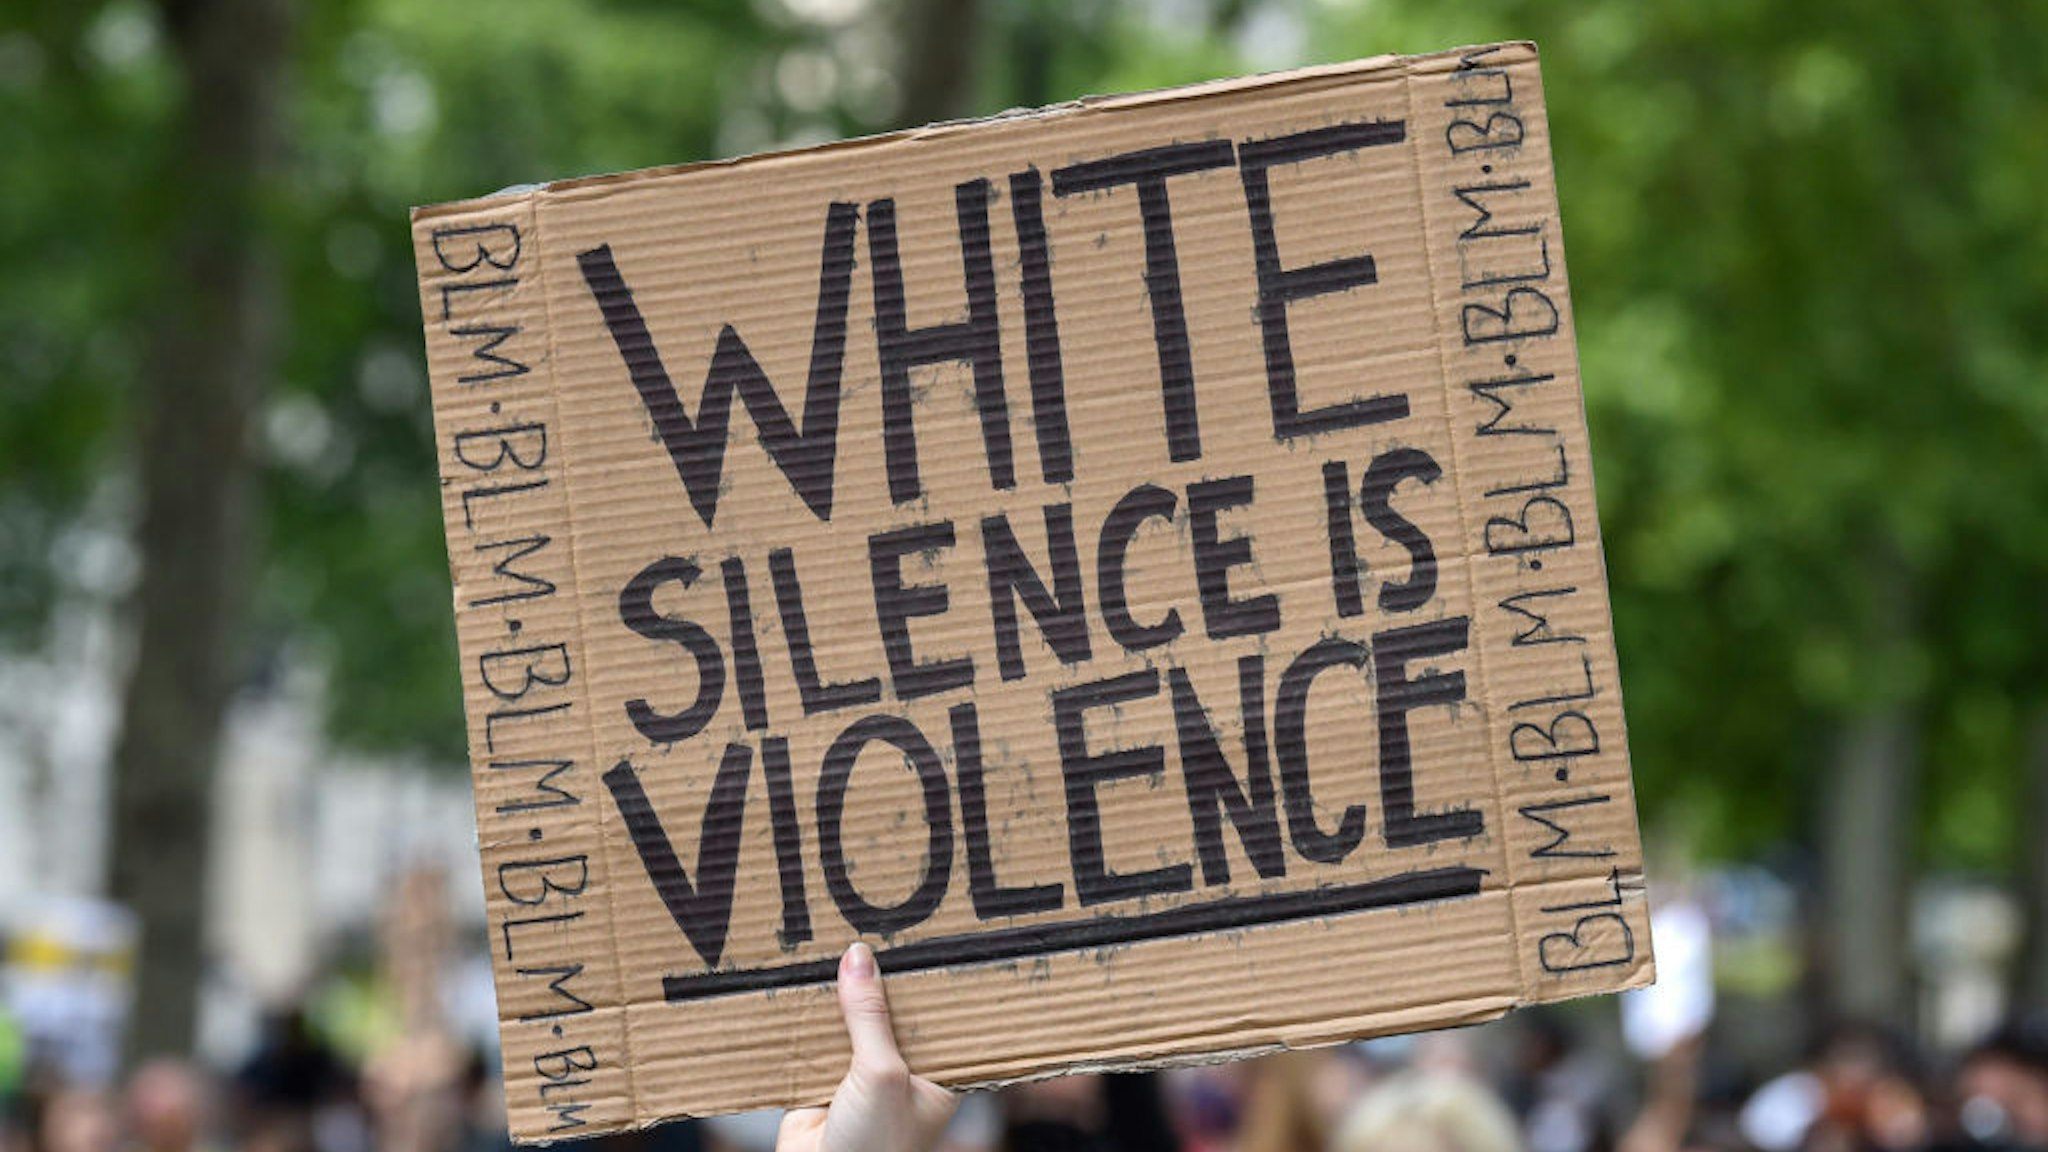 A Black Lives Matter protester holds a placard saying White Silence is Violence during the demonstration. Black Lives Matter protests continue in the United Kingdom after the death of George Floyd killed by a police officer in Minneapolis.